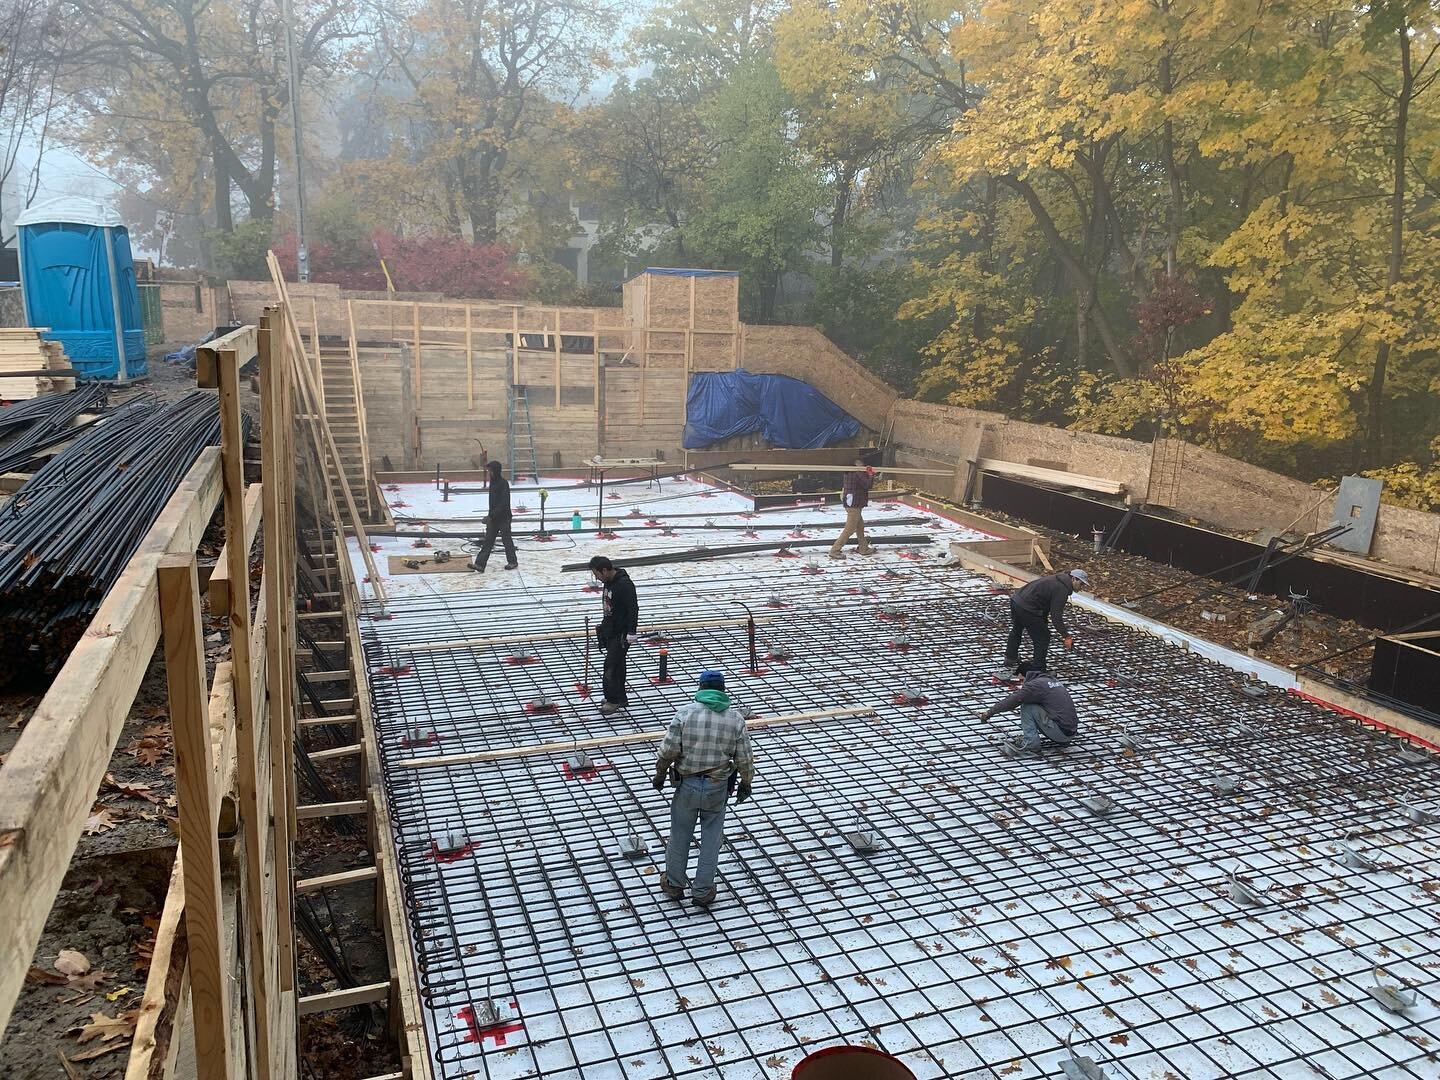 12&rdquo; raft slab formed, 6&rdquo; under slab insulation and V/B installed. Let the rebar commence! First of 2 layers being installed at the ravine build.